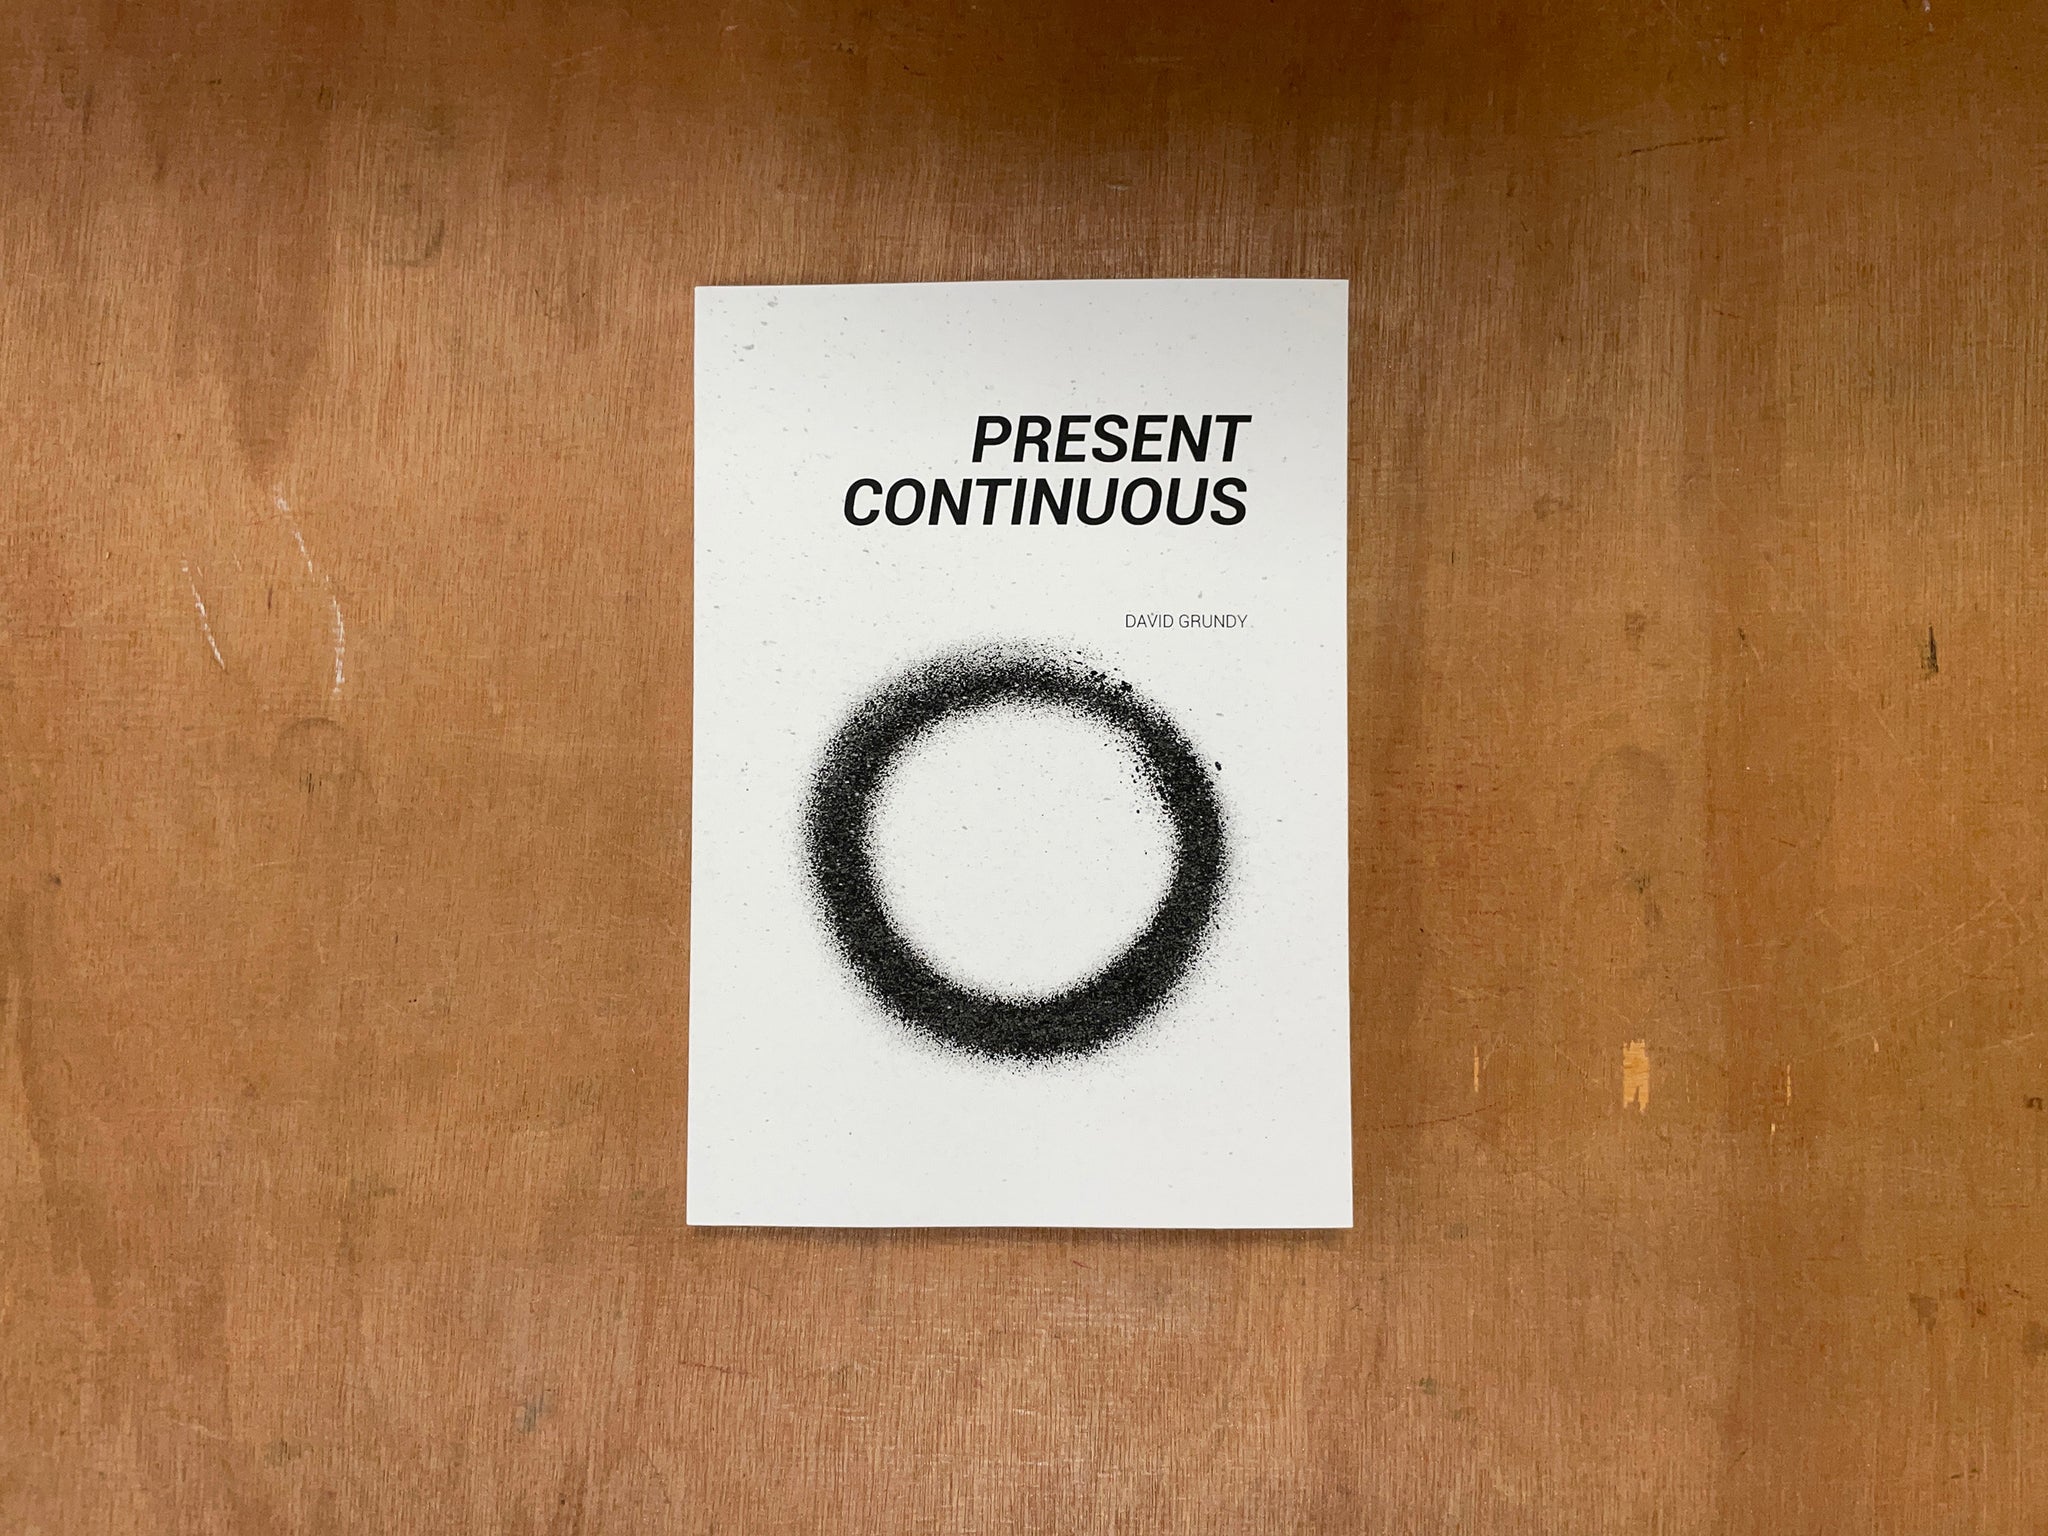 PRESENT CONTINUOUS by David Grundy